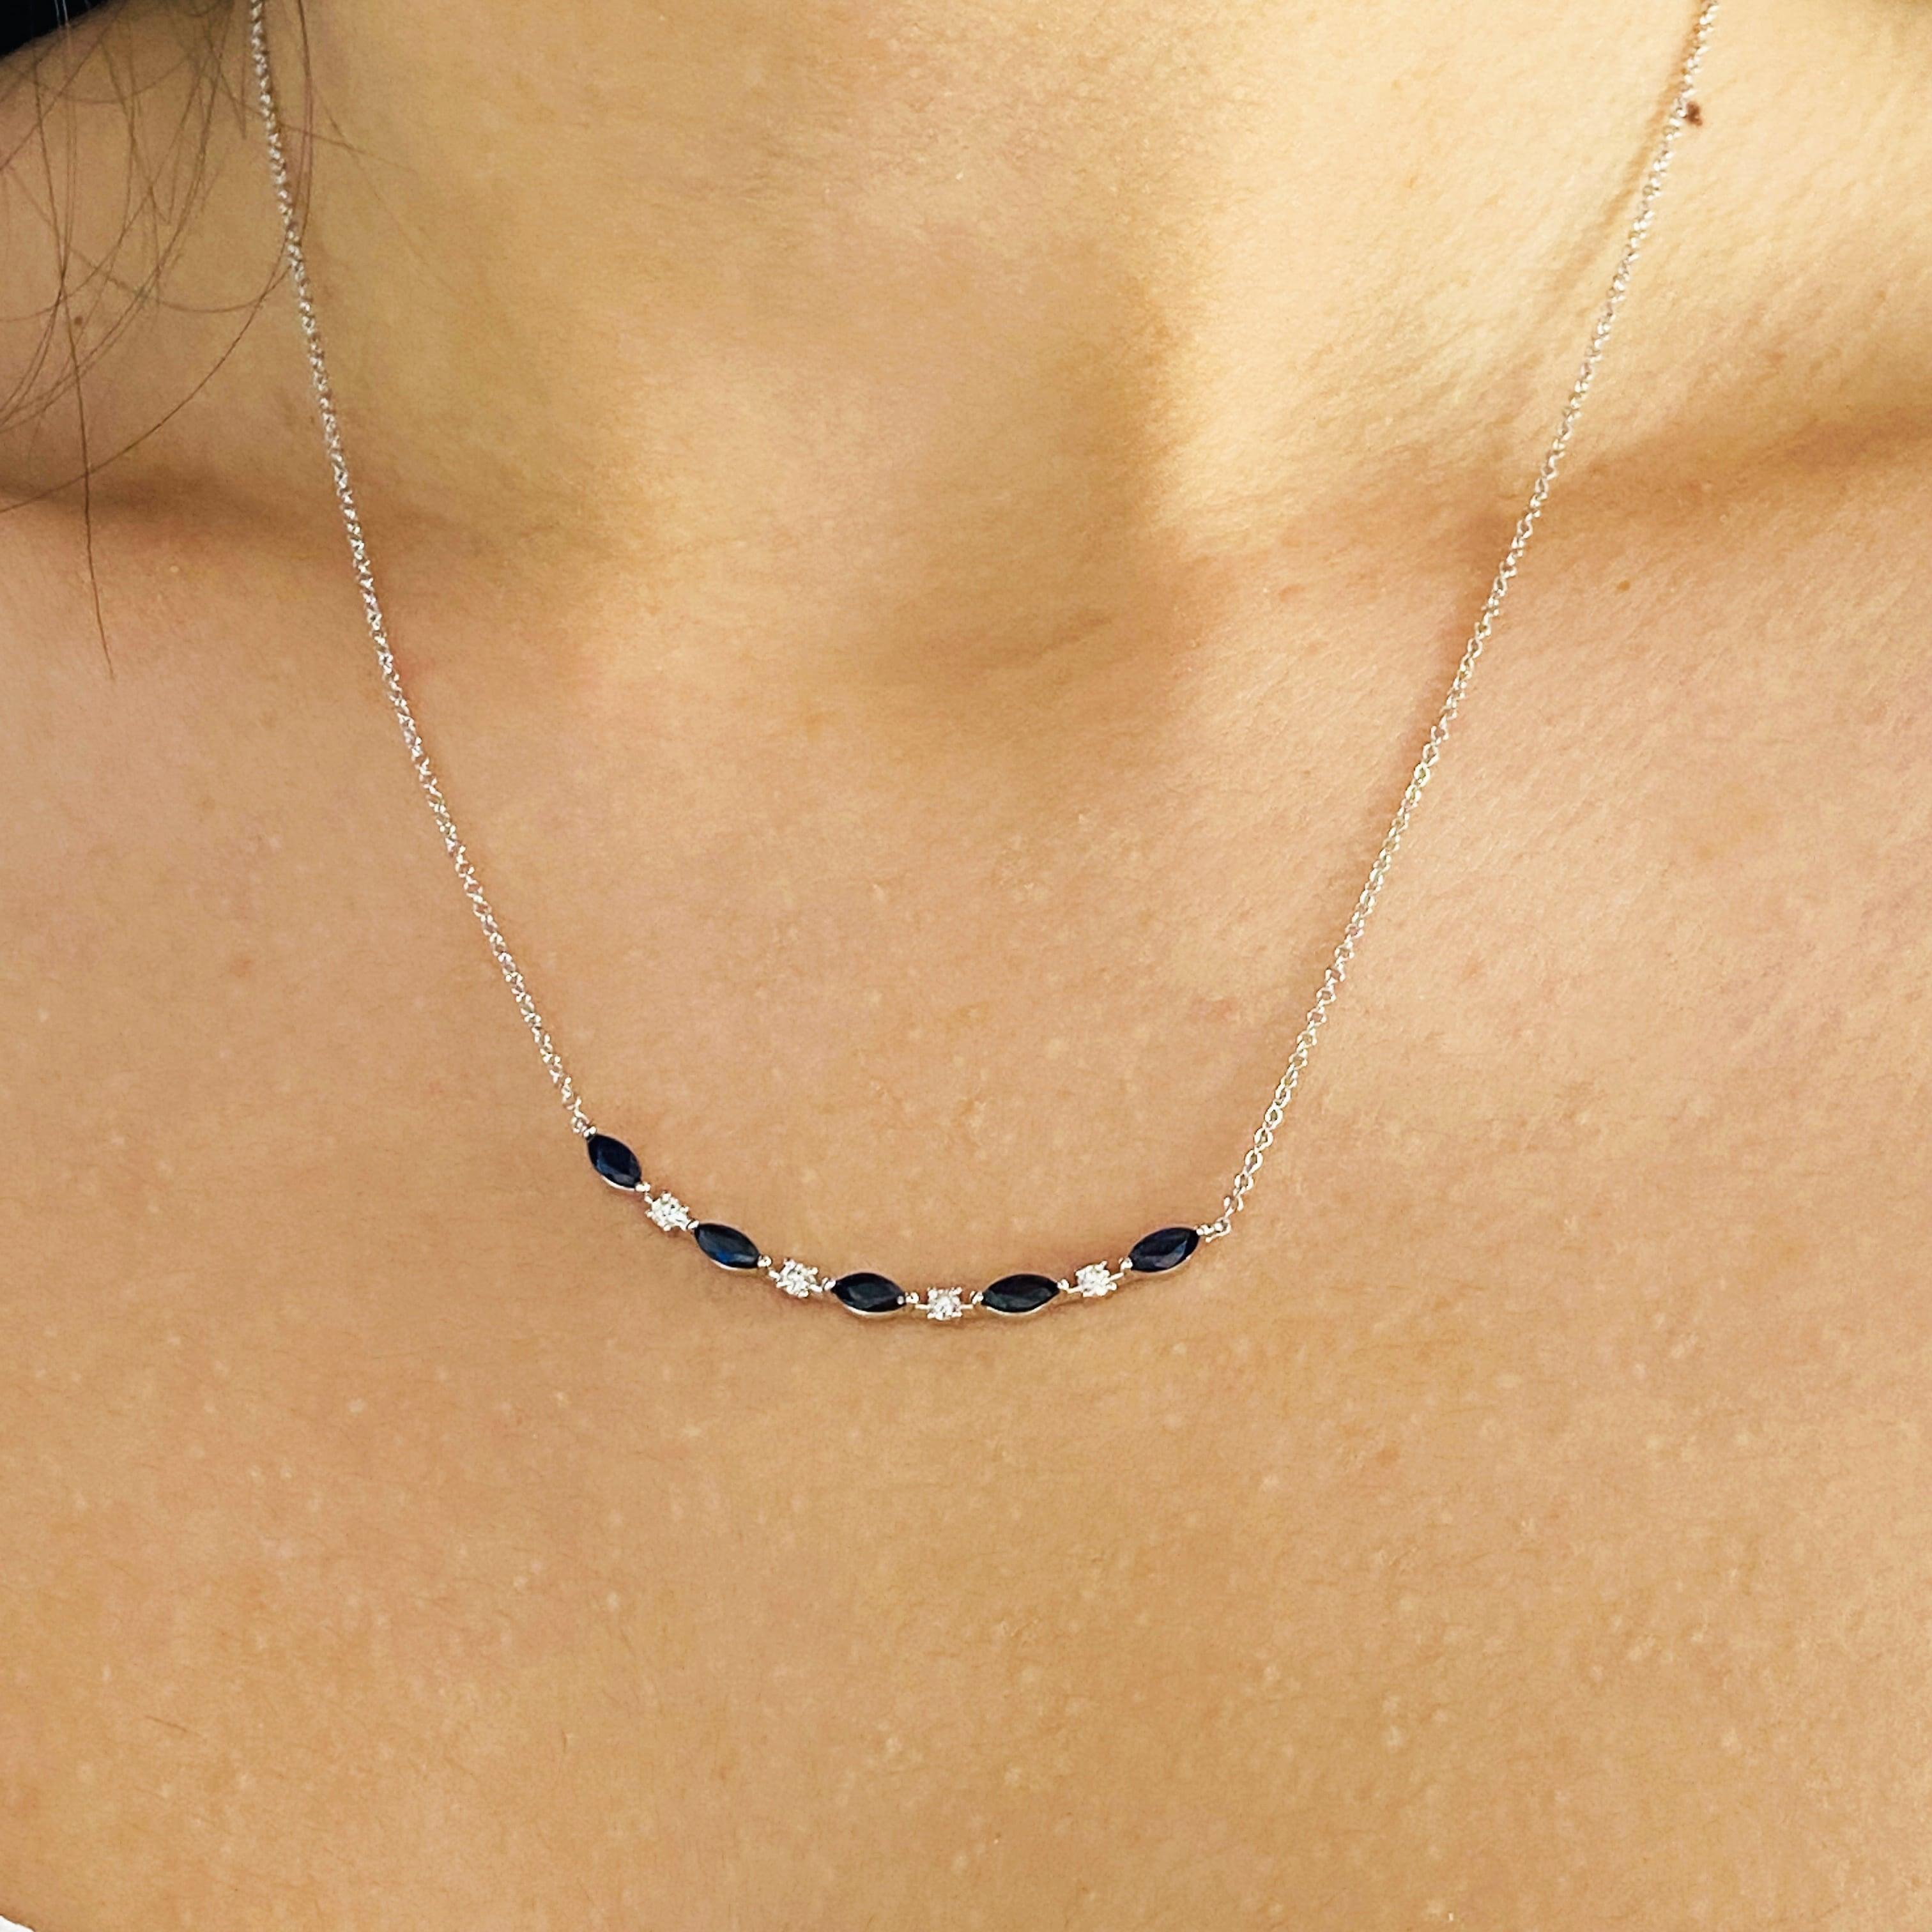 Contemporary Sapphire & Diamond Curved Bar Necklace 14K White Gold Minimalist NK7253W45SA LV For Sale